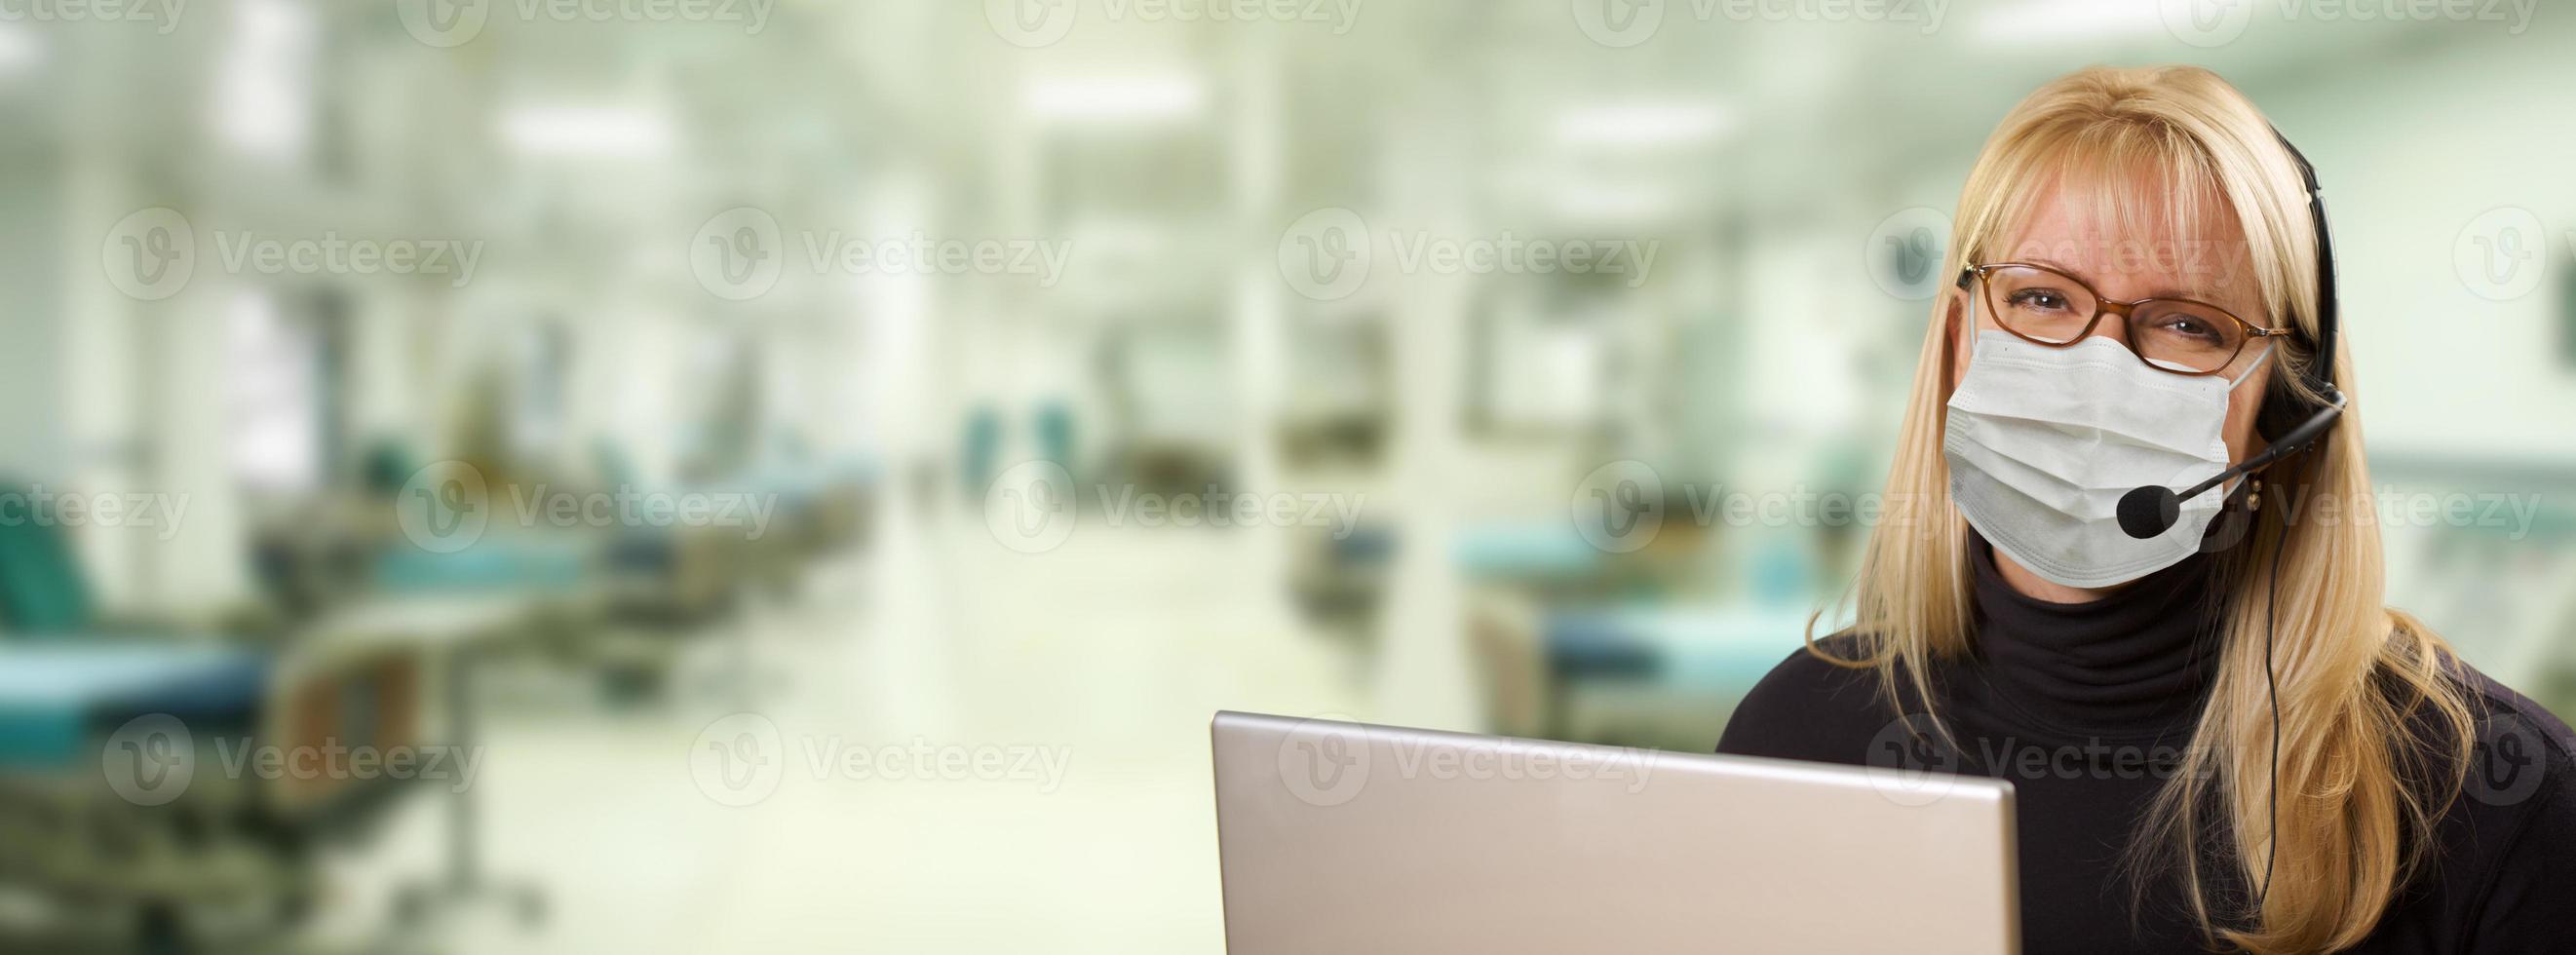 Woman Sitting at Computer with Phone Headset Within Hospital. photo